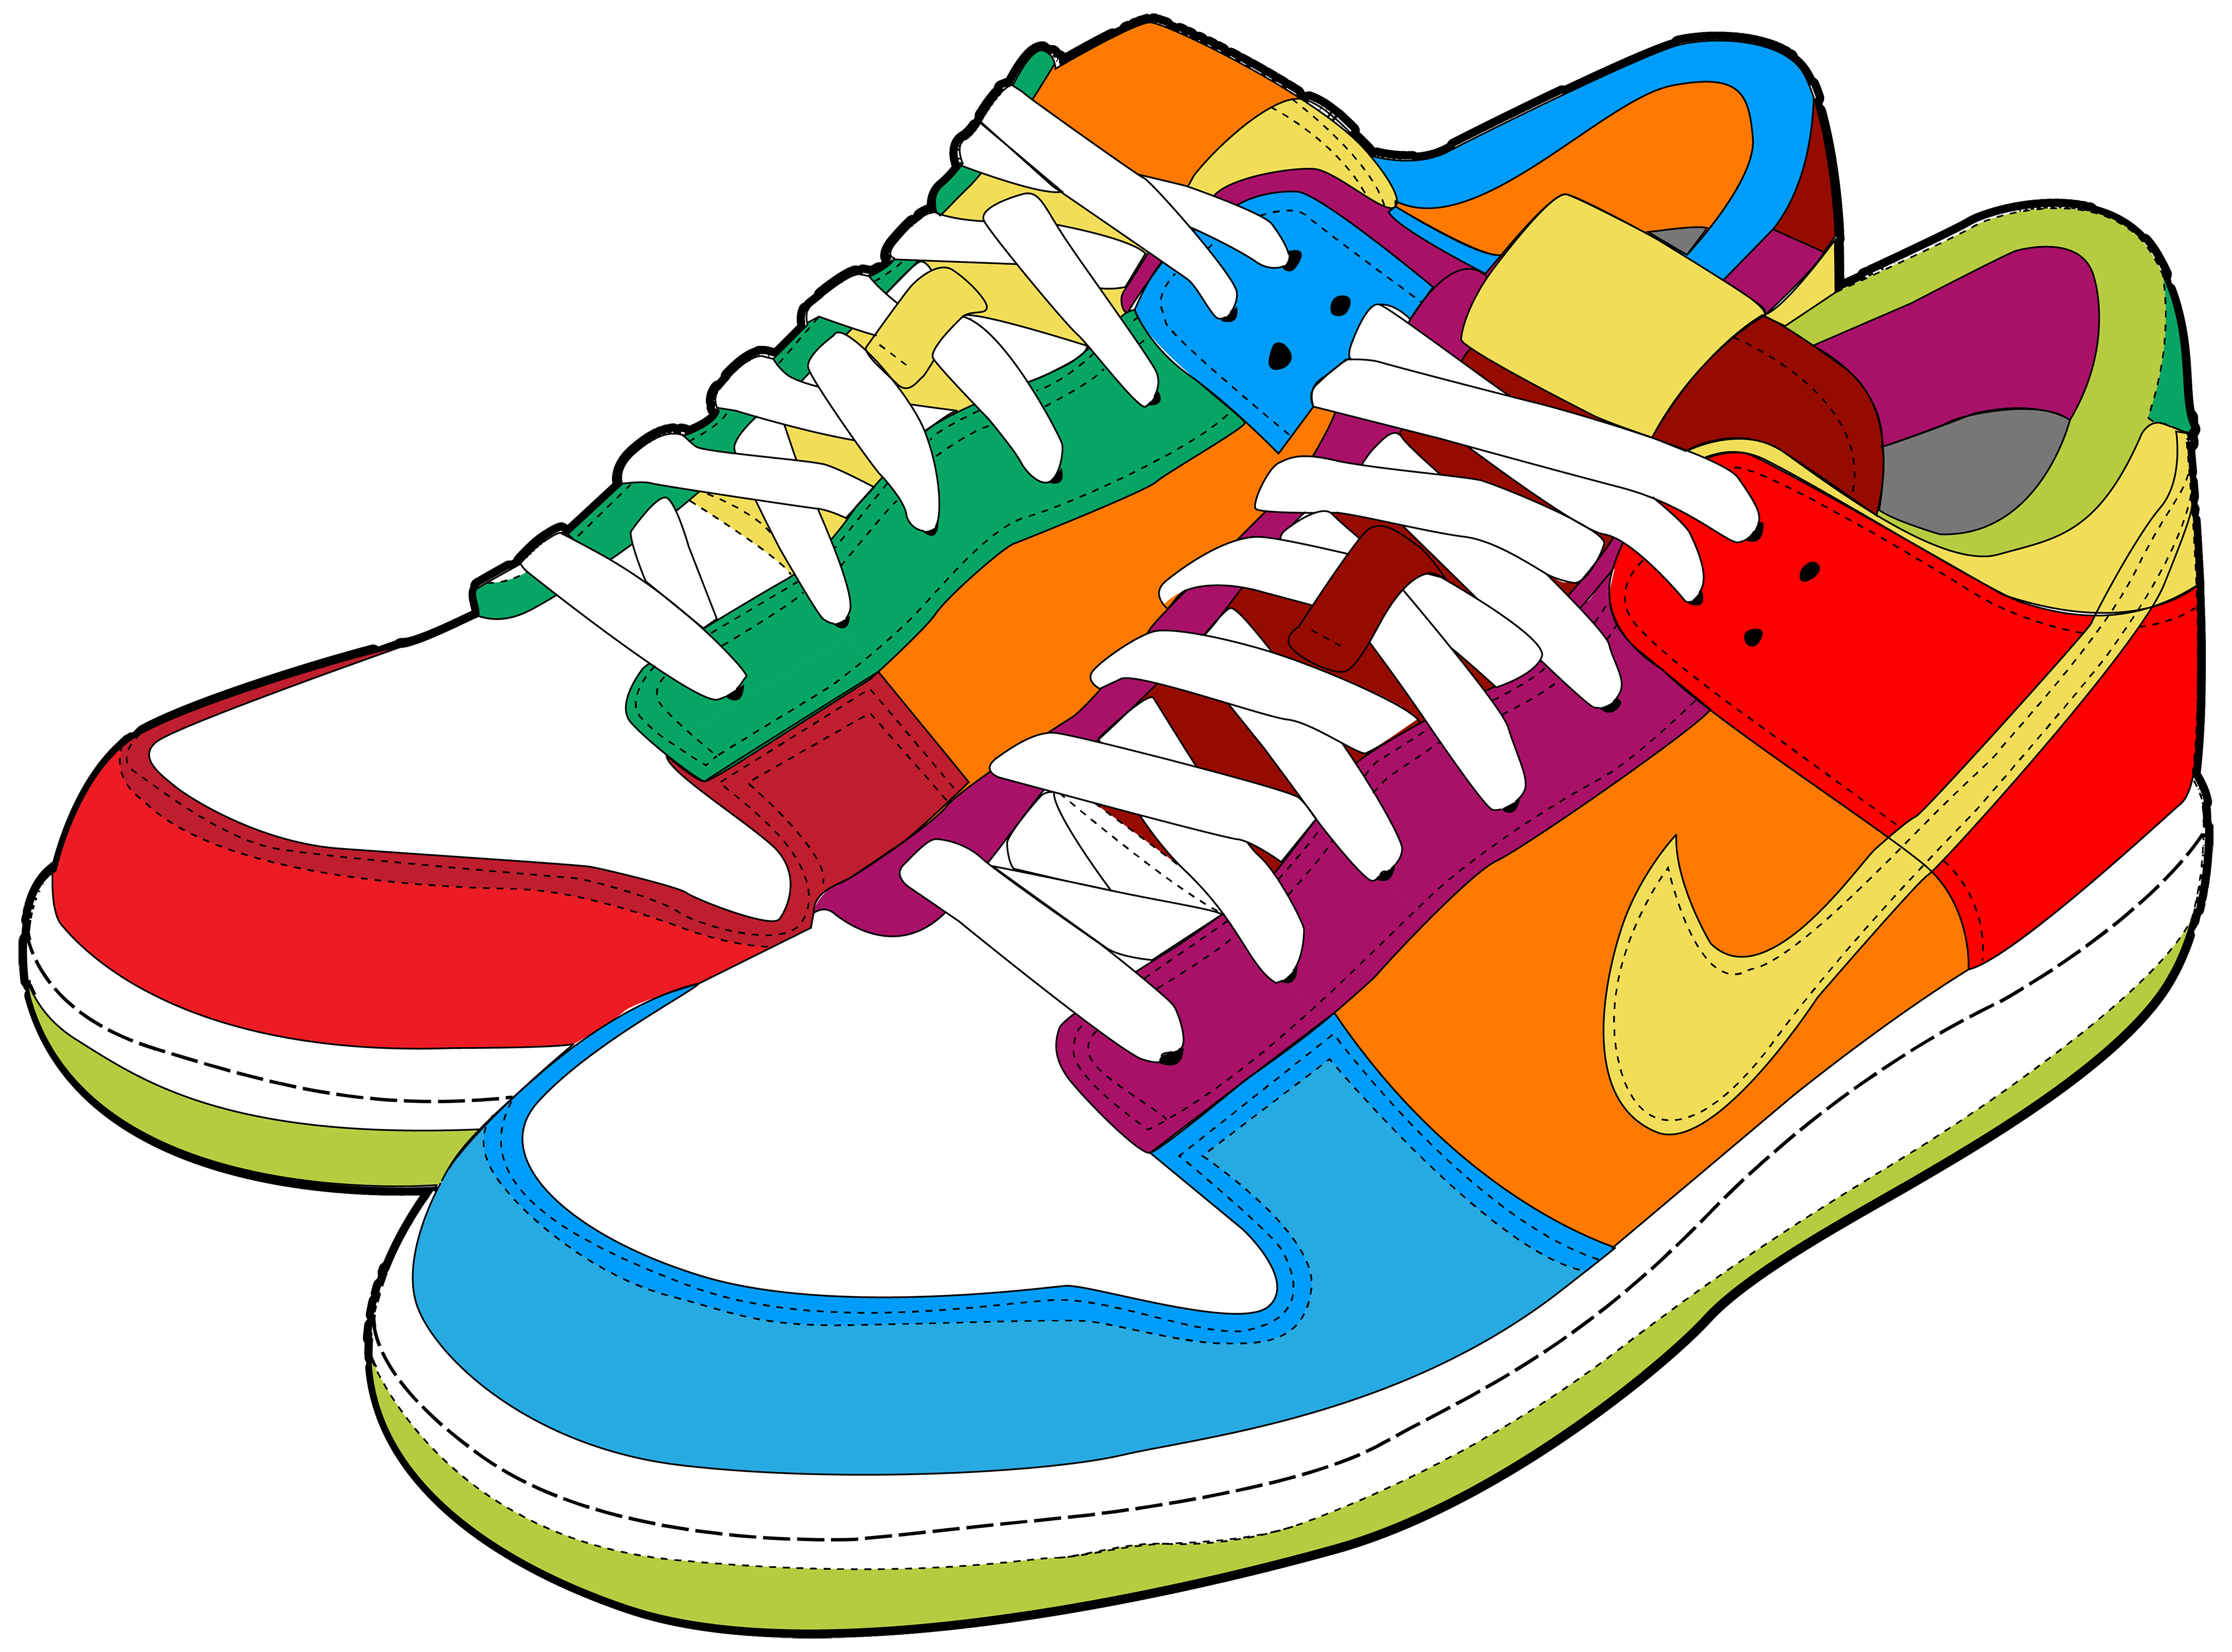 Dictionary clipart walking. Colorful sneakers png shoes